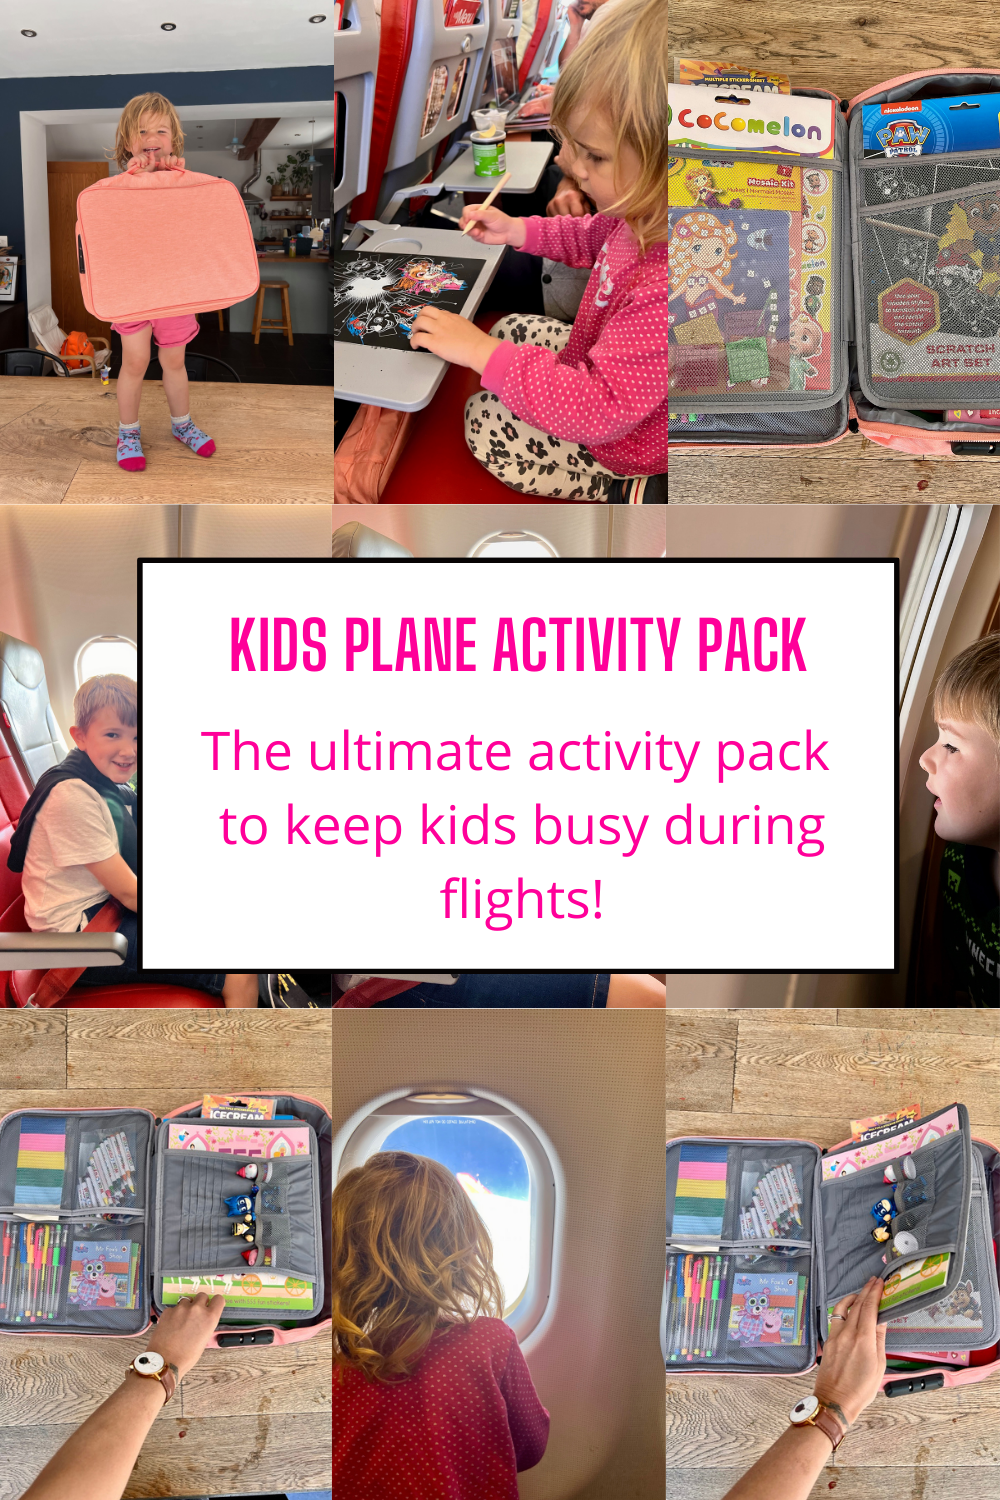 Binder of activities for kids on the plane